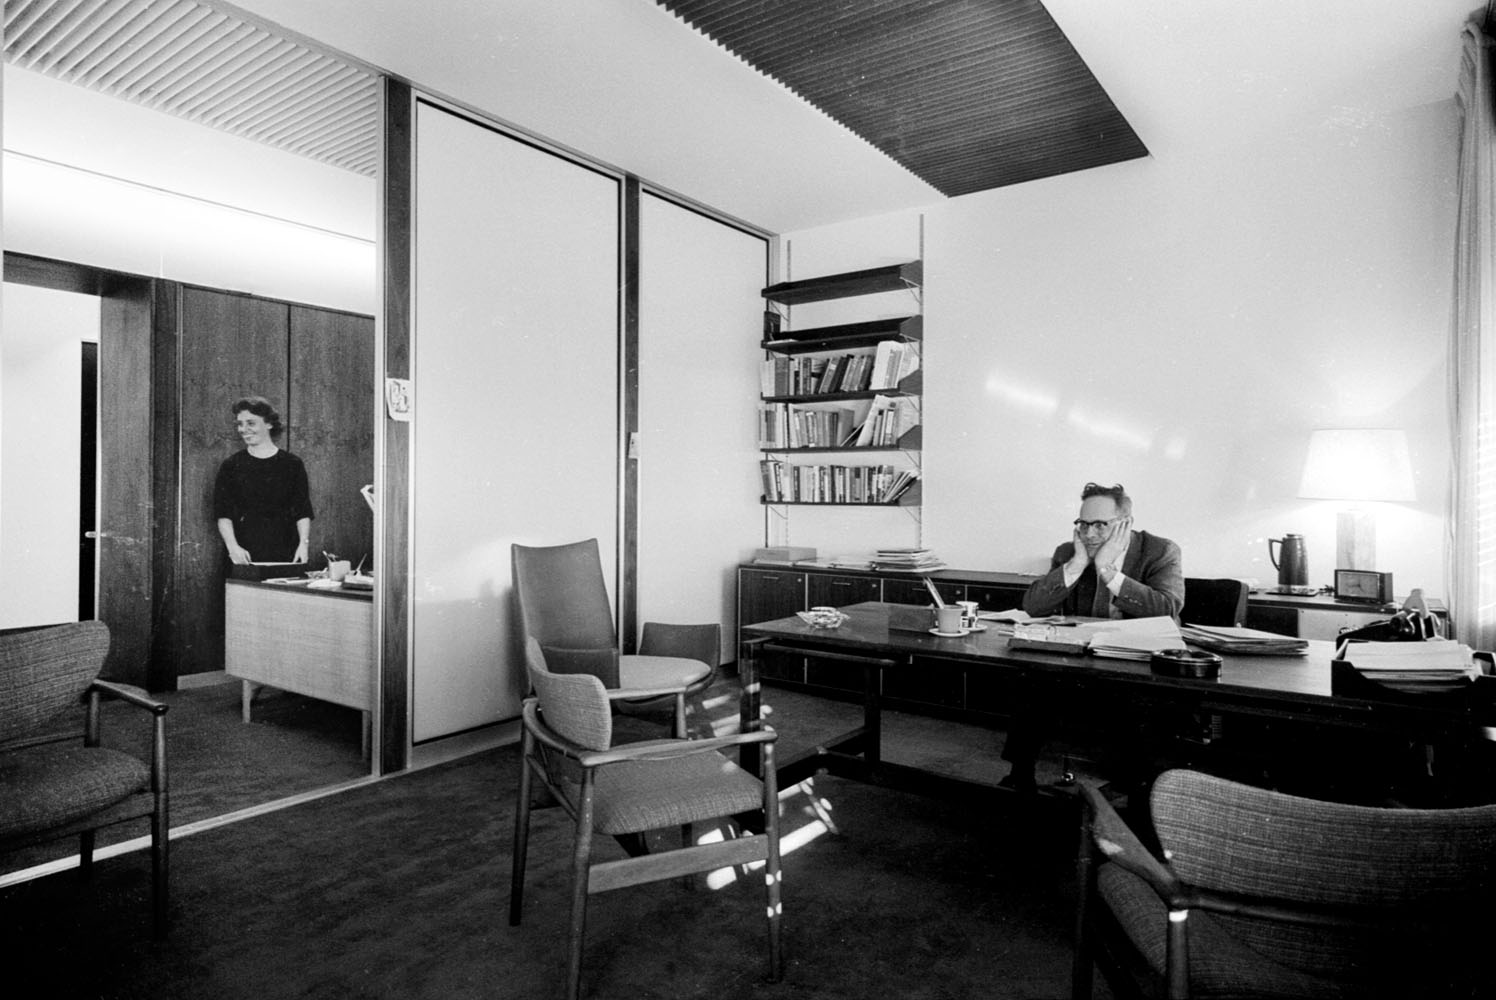 Let's travel back to the 1960s—a time when everything was in grayscale—and breathe in a bit of the decadent air suffusing Don Draper's work life. Looks like that fellow on the right needs a break—so let's stretch our legs and take a stroll around the office with him.